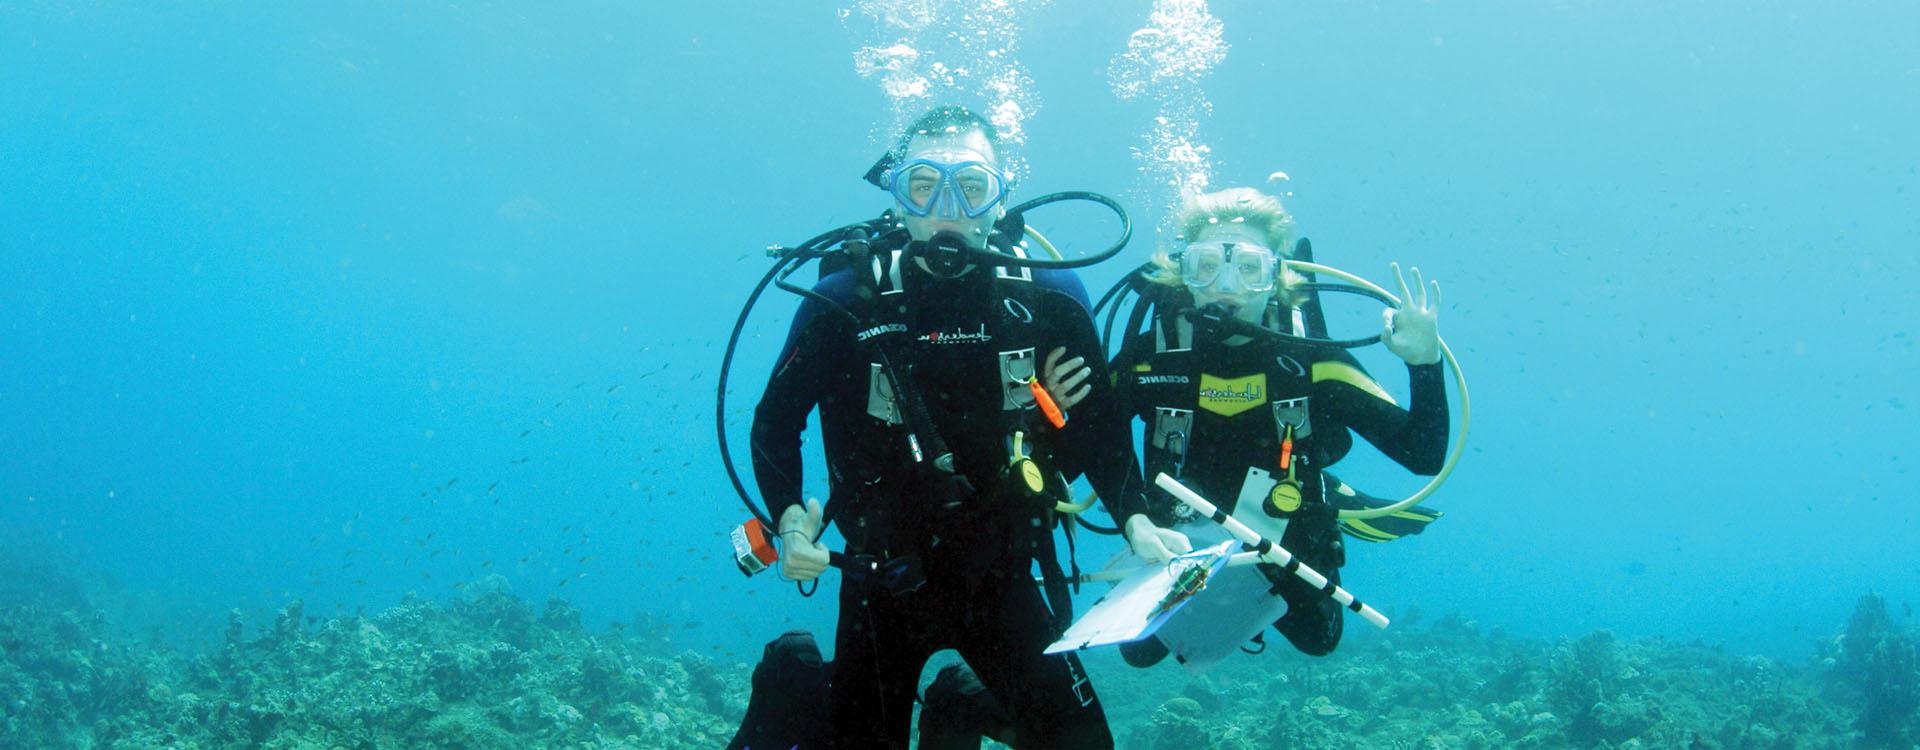 WLC students scuba diving near coral reef